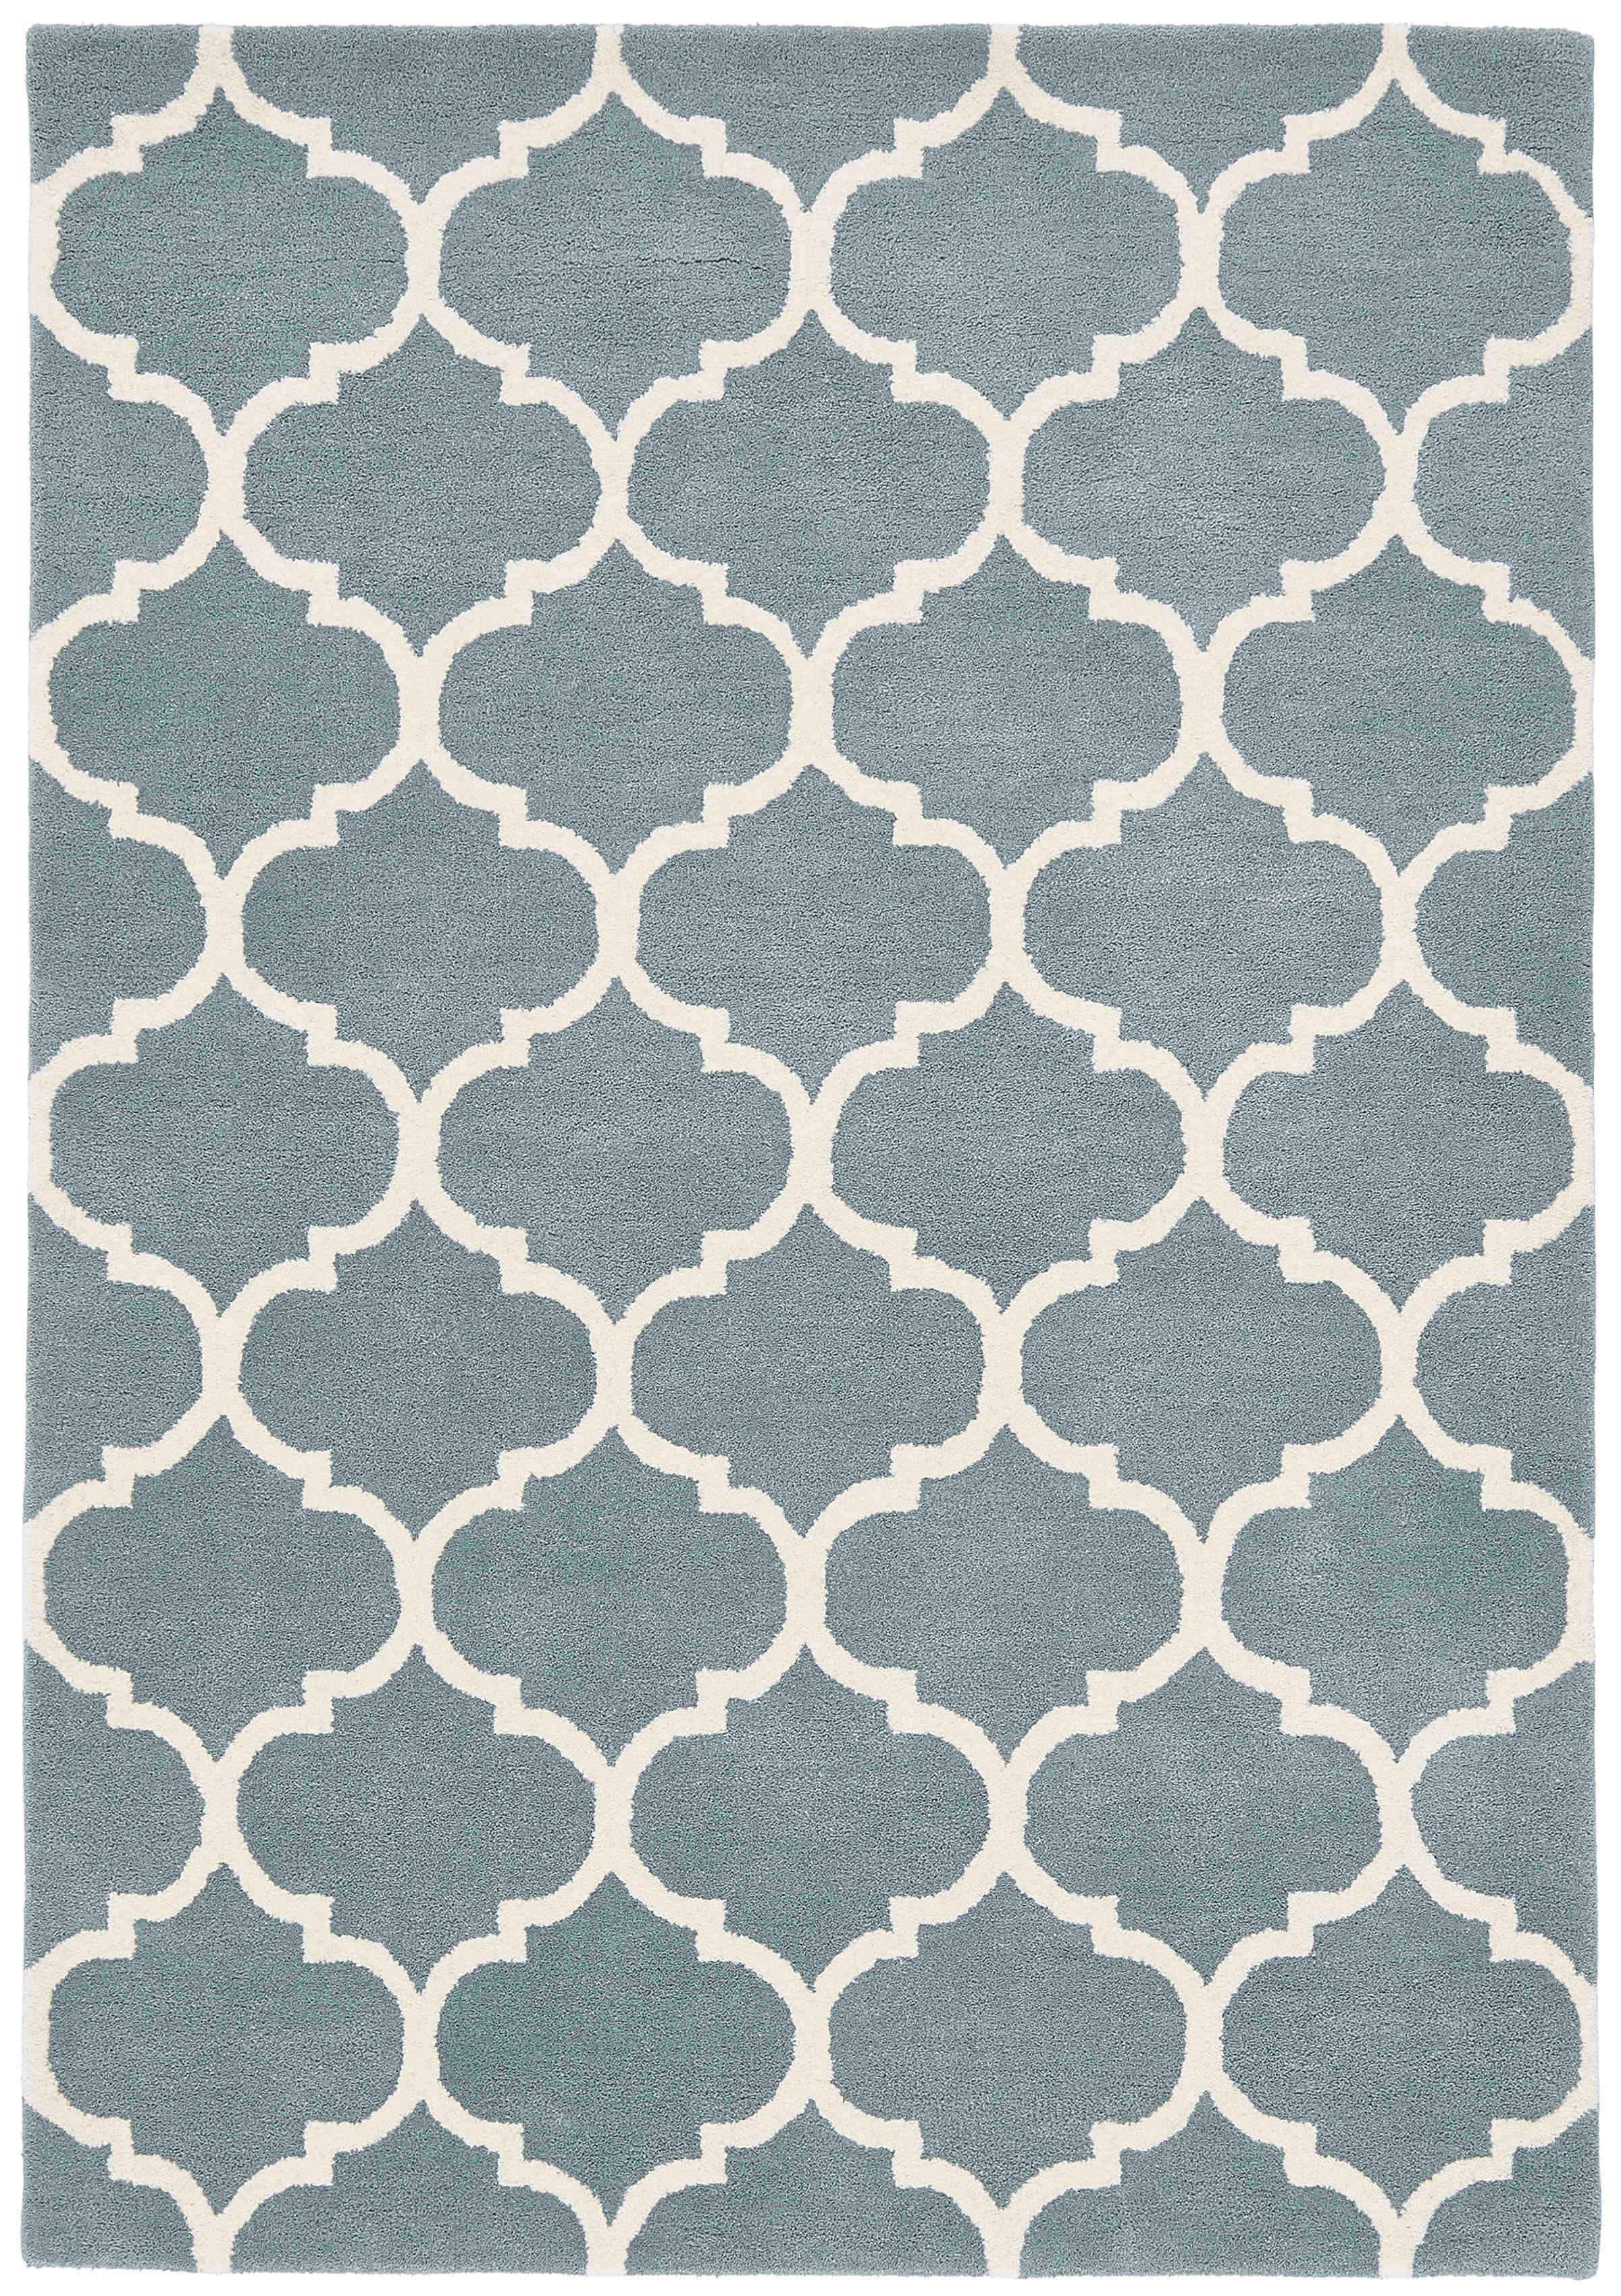 duck egg blue geometric rug with an ogee pattern